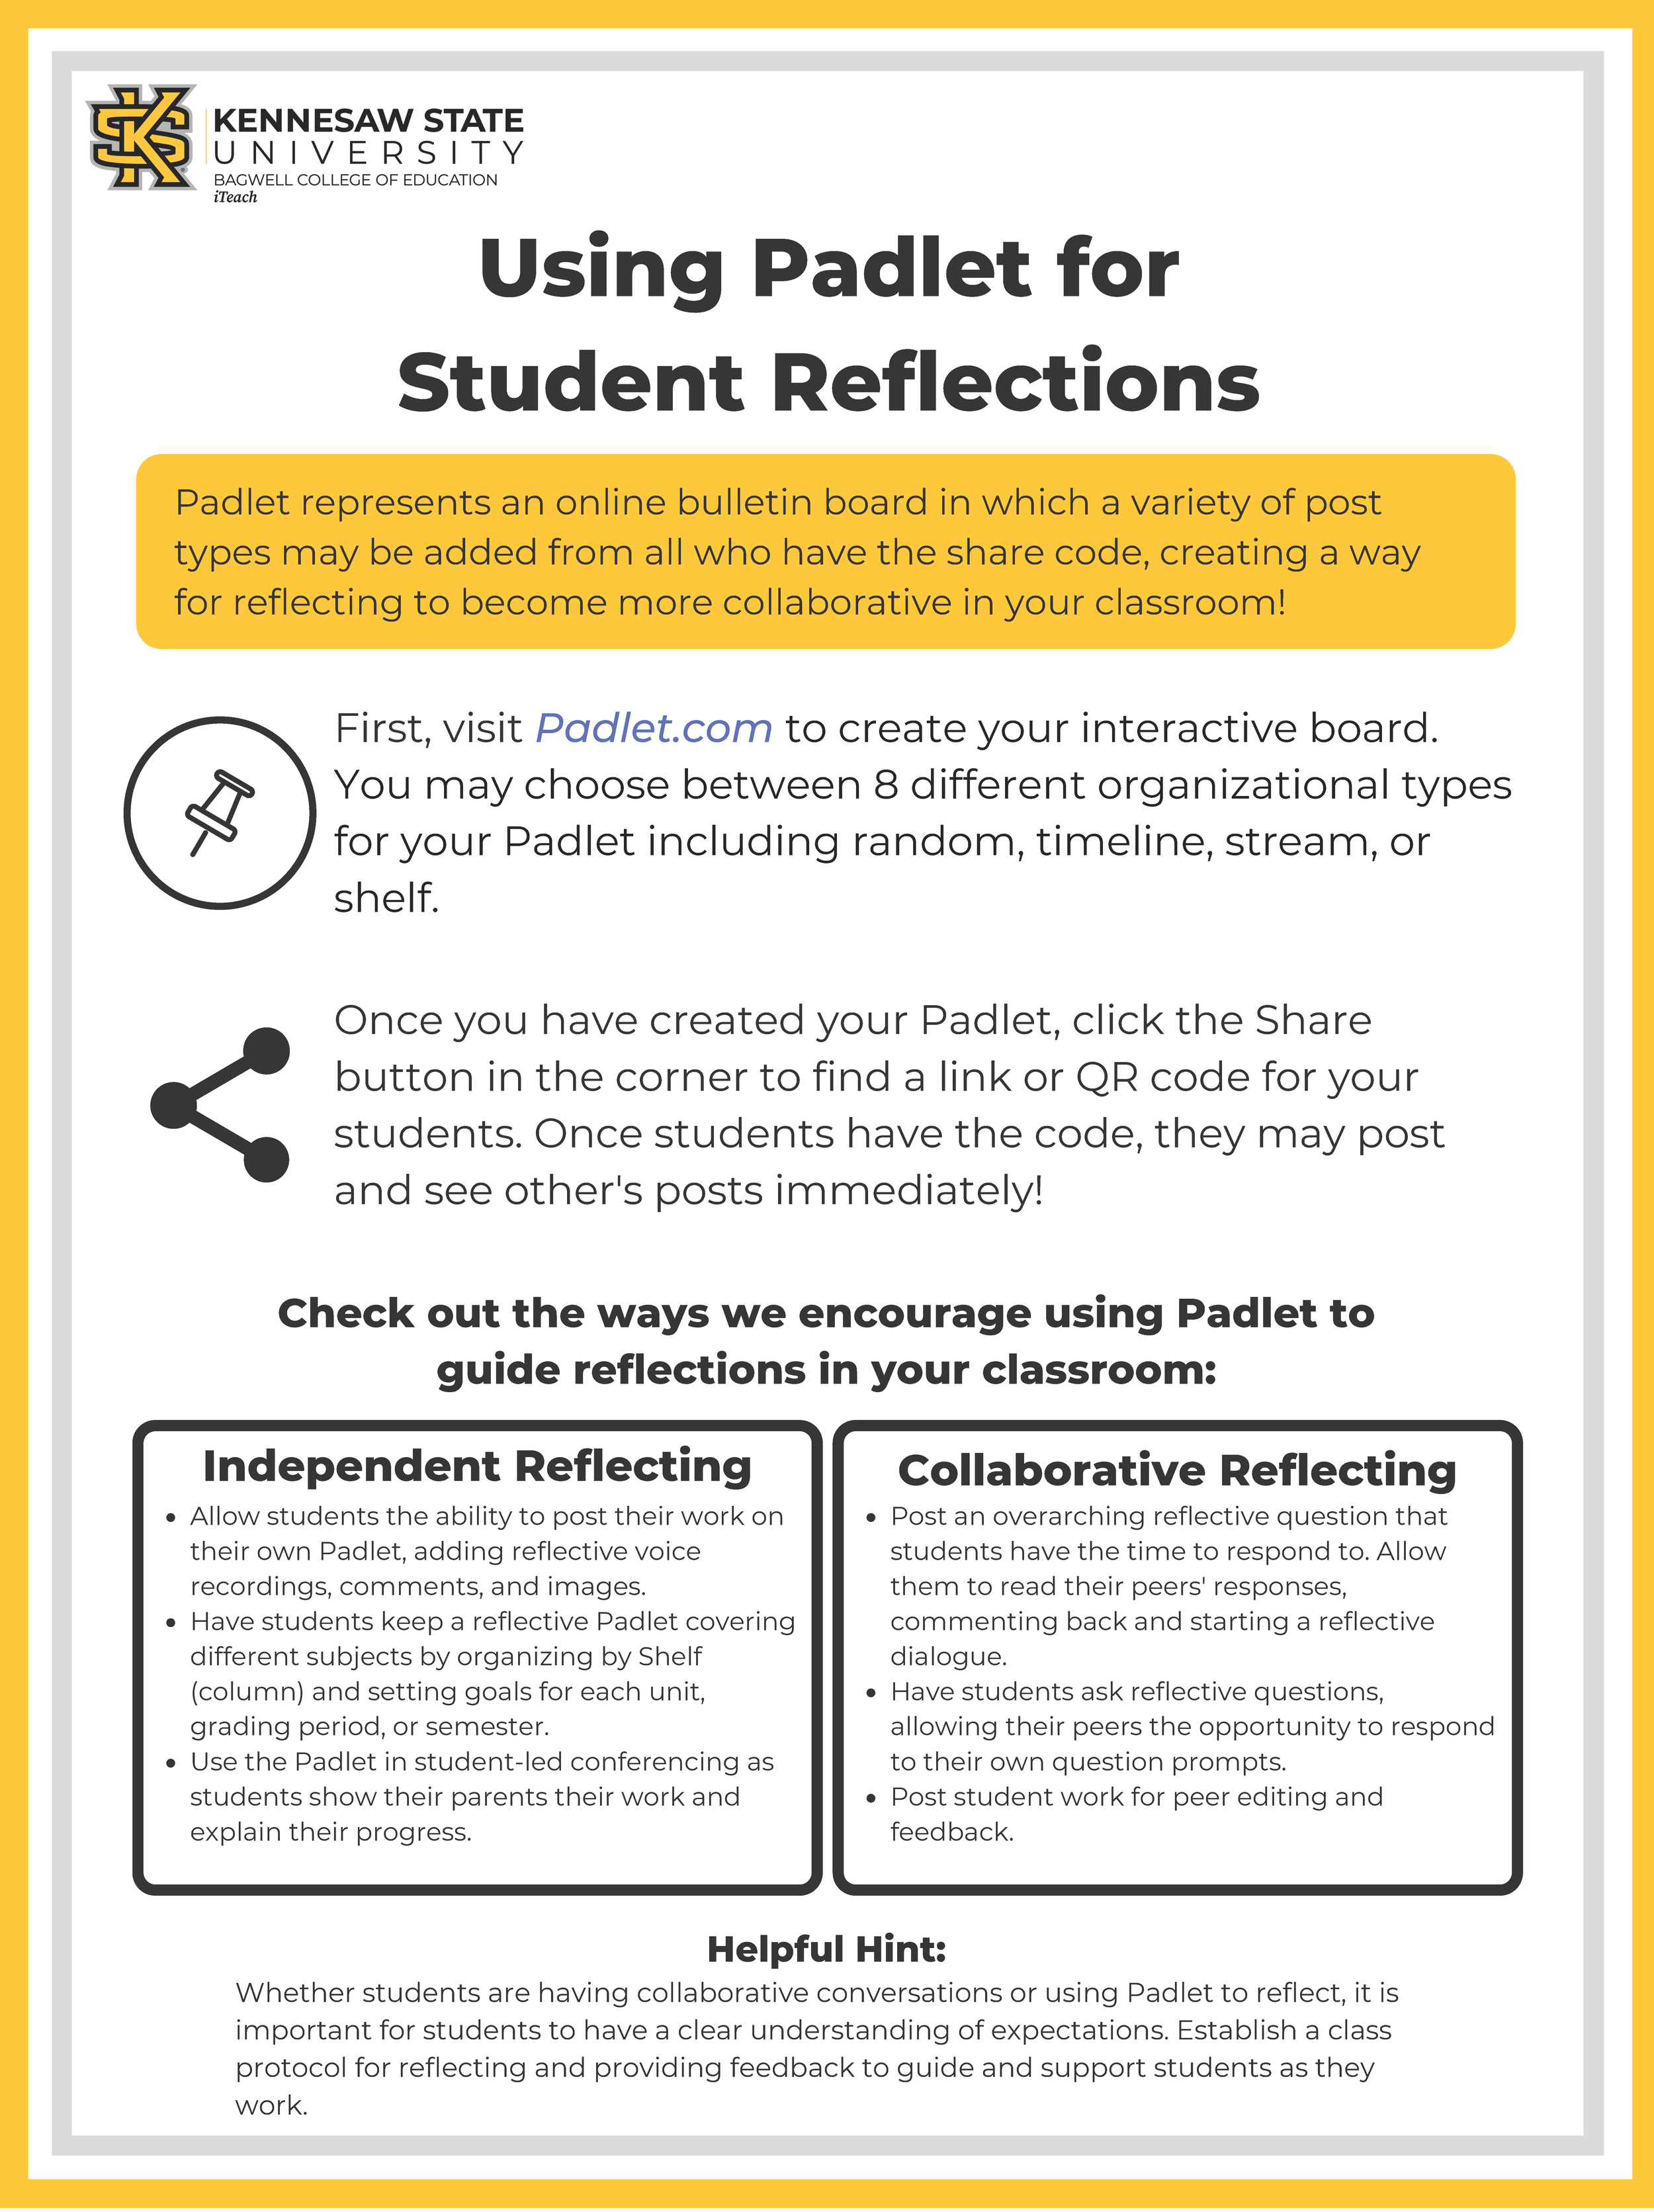 Using Padlet for Student Reflections.png